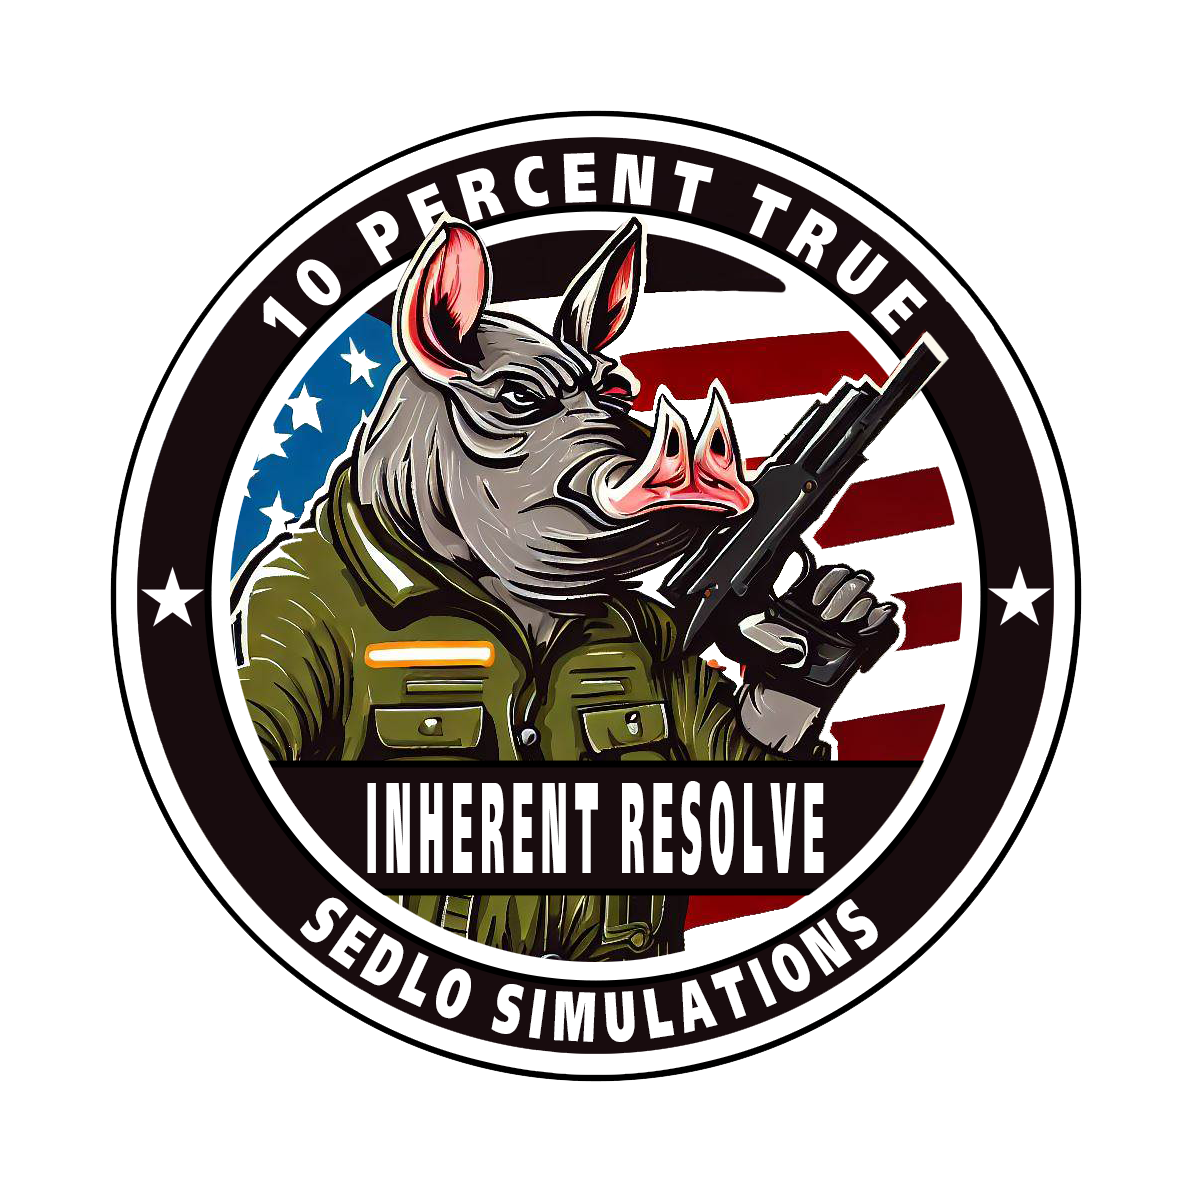 10 Percent True and Sedlo Present: Operation Inherent Resolve - An A-10C II Mission (2024-05-20)